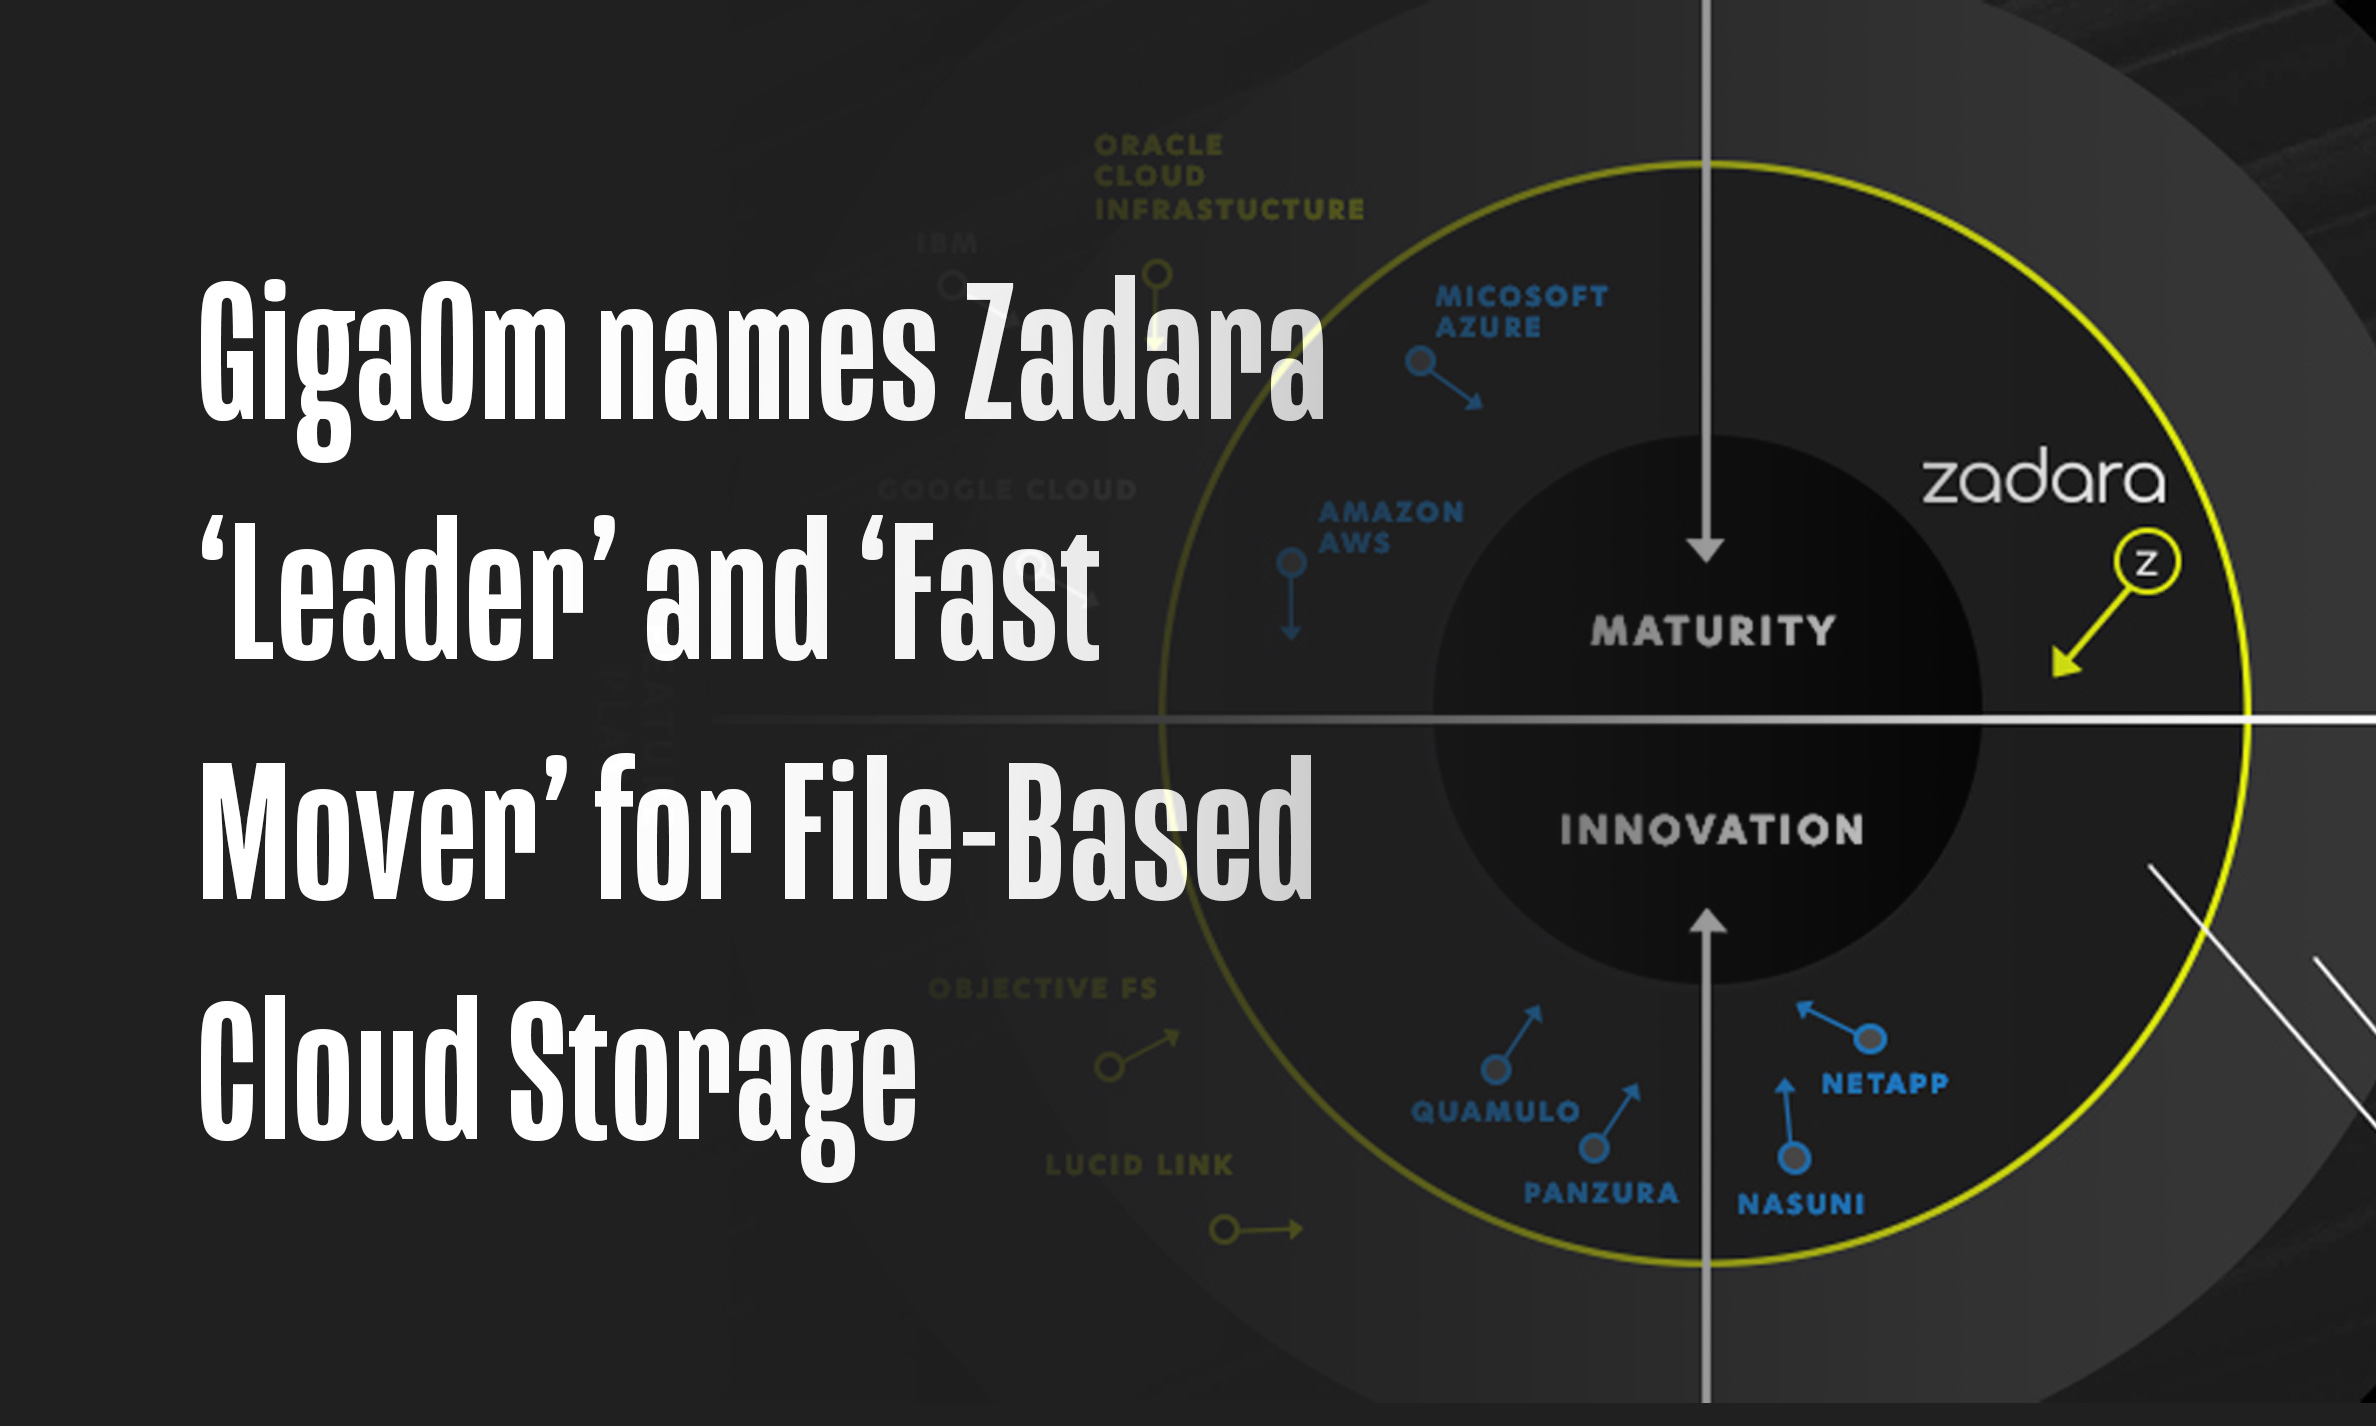 GigaOm names Zadara ‘Leader’ and ‘Fast Mover’ for File-Based Cloud Storage